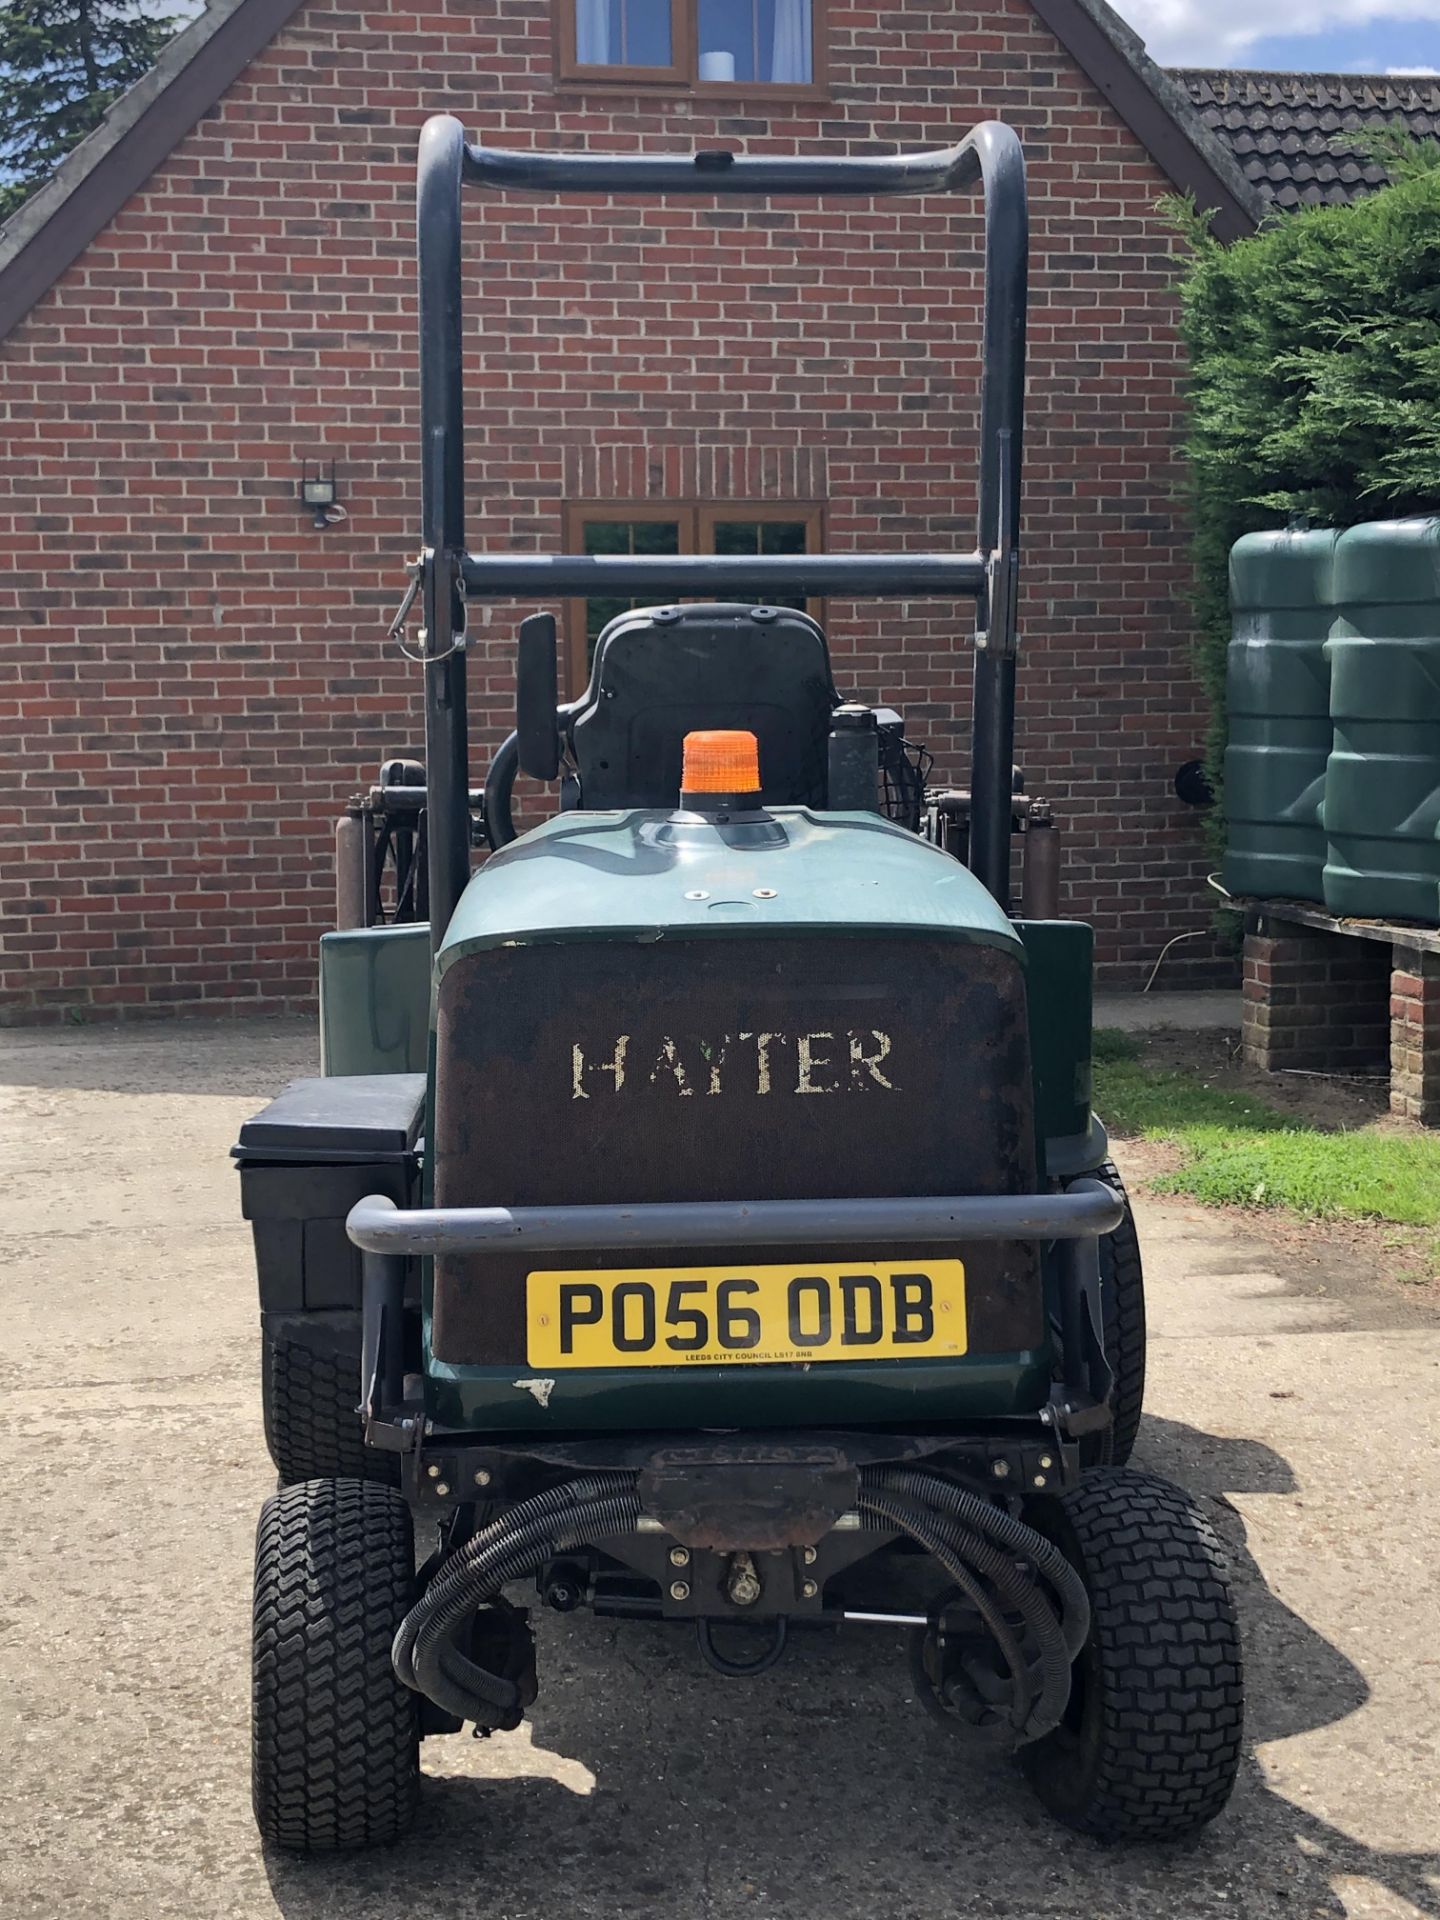 HAYTER LT324 RIDE ON LAWN MOWER, STARTS FIRST TIME, FULL WORKING ORDER, YEAR 2006 *PLUS VAT* - Image 7 of 8